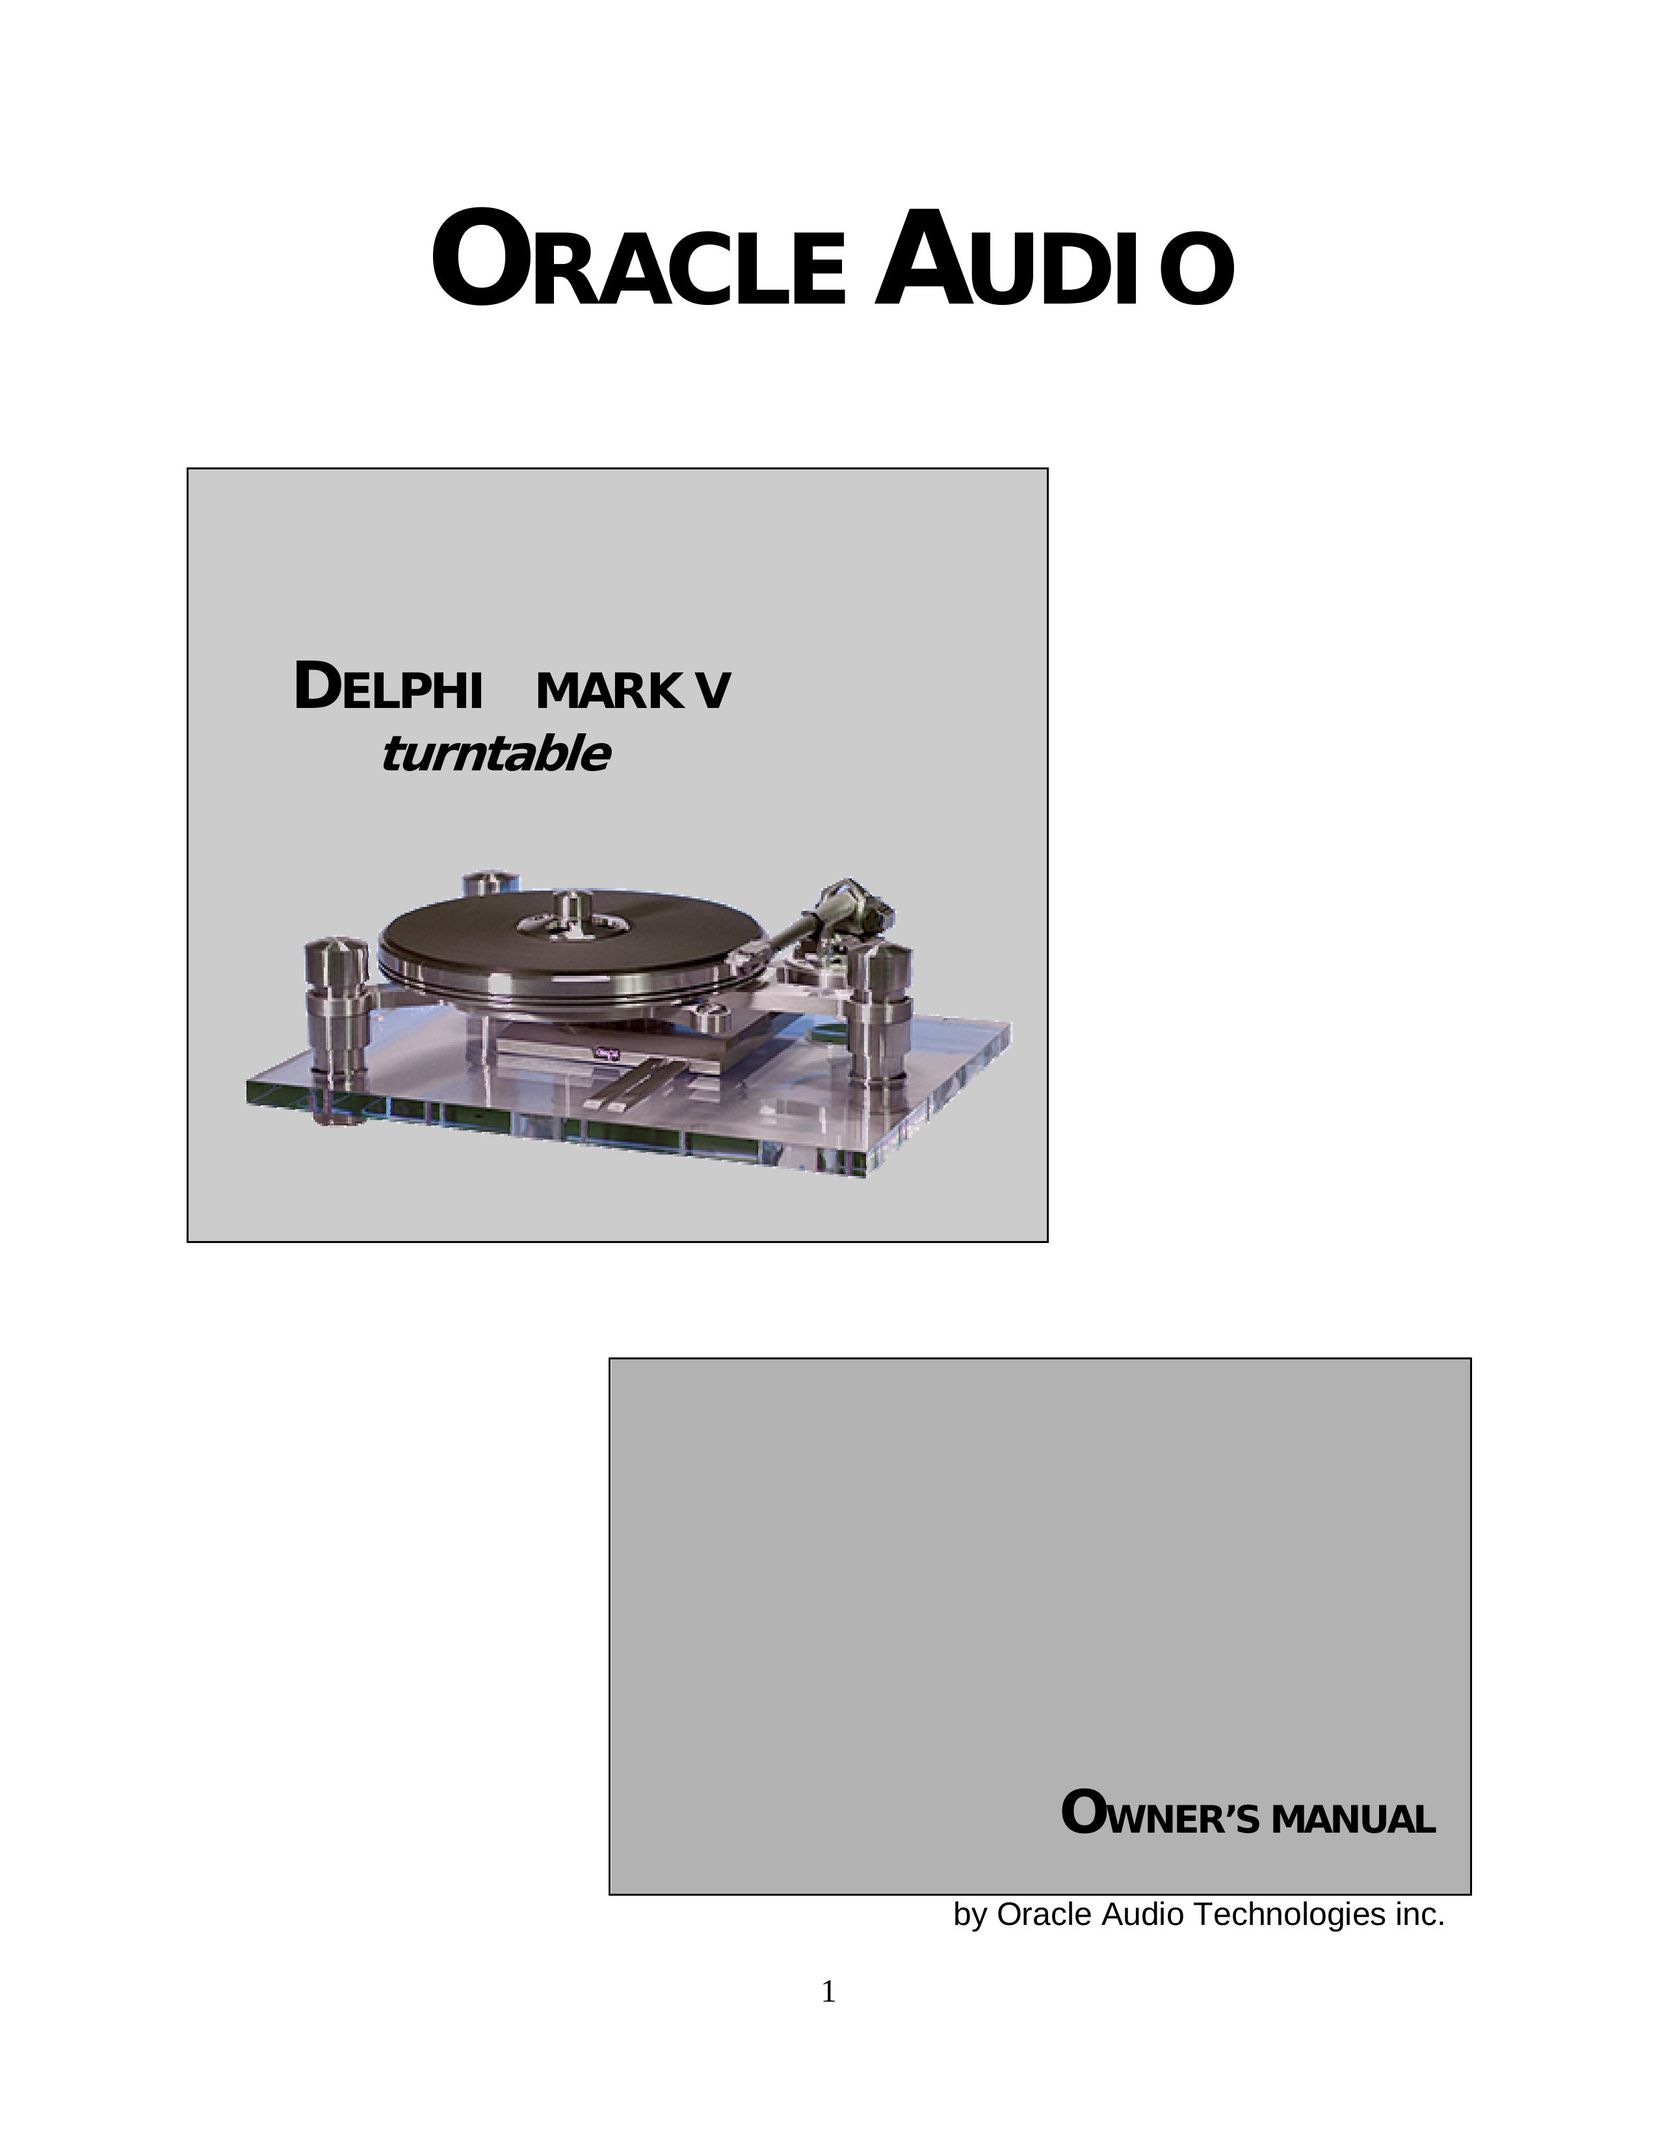 Oracle Audio Technologies V Turntable User Manual